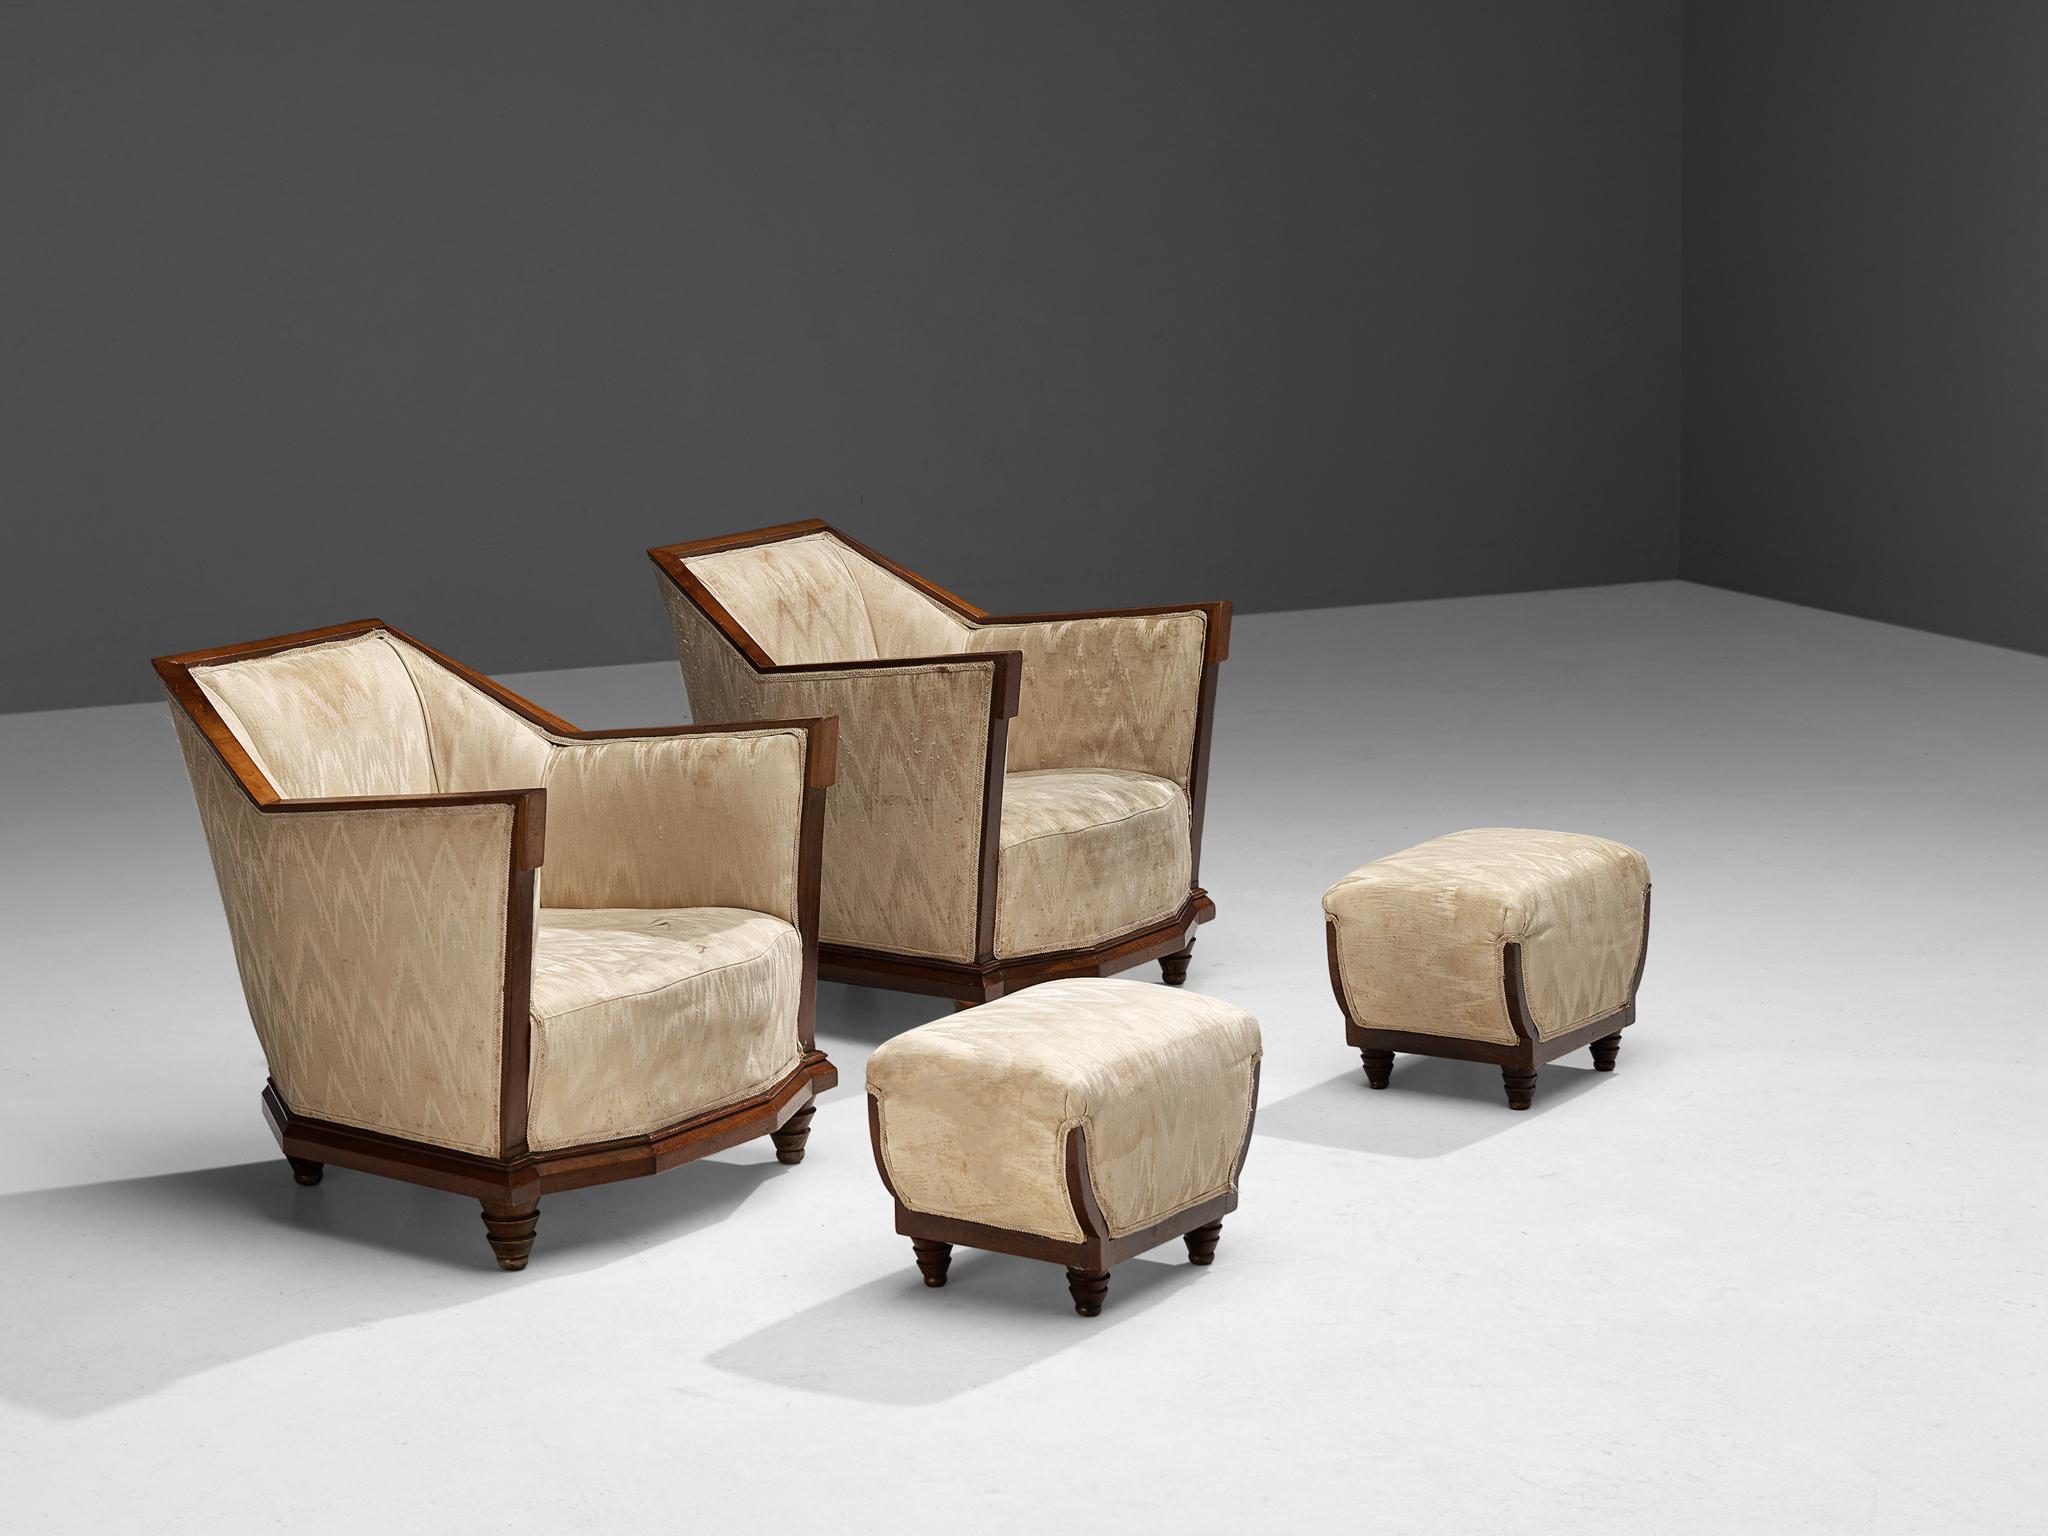 Pair of lounge chairs with ottomans, walnut, fabric, Italy, 1930s/1940s

A magnificent pair of strong and angular armchairs in walnut wood and upholstered in a cream silk fabric in a subtle triangular pattern, a typical choice for furniture that